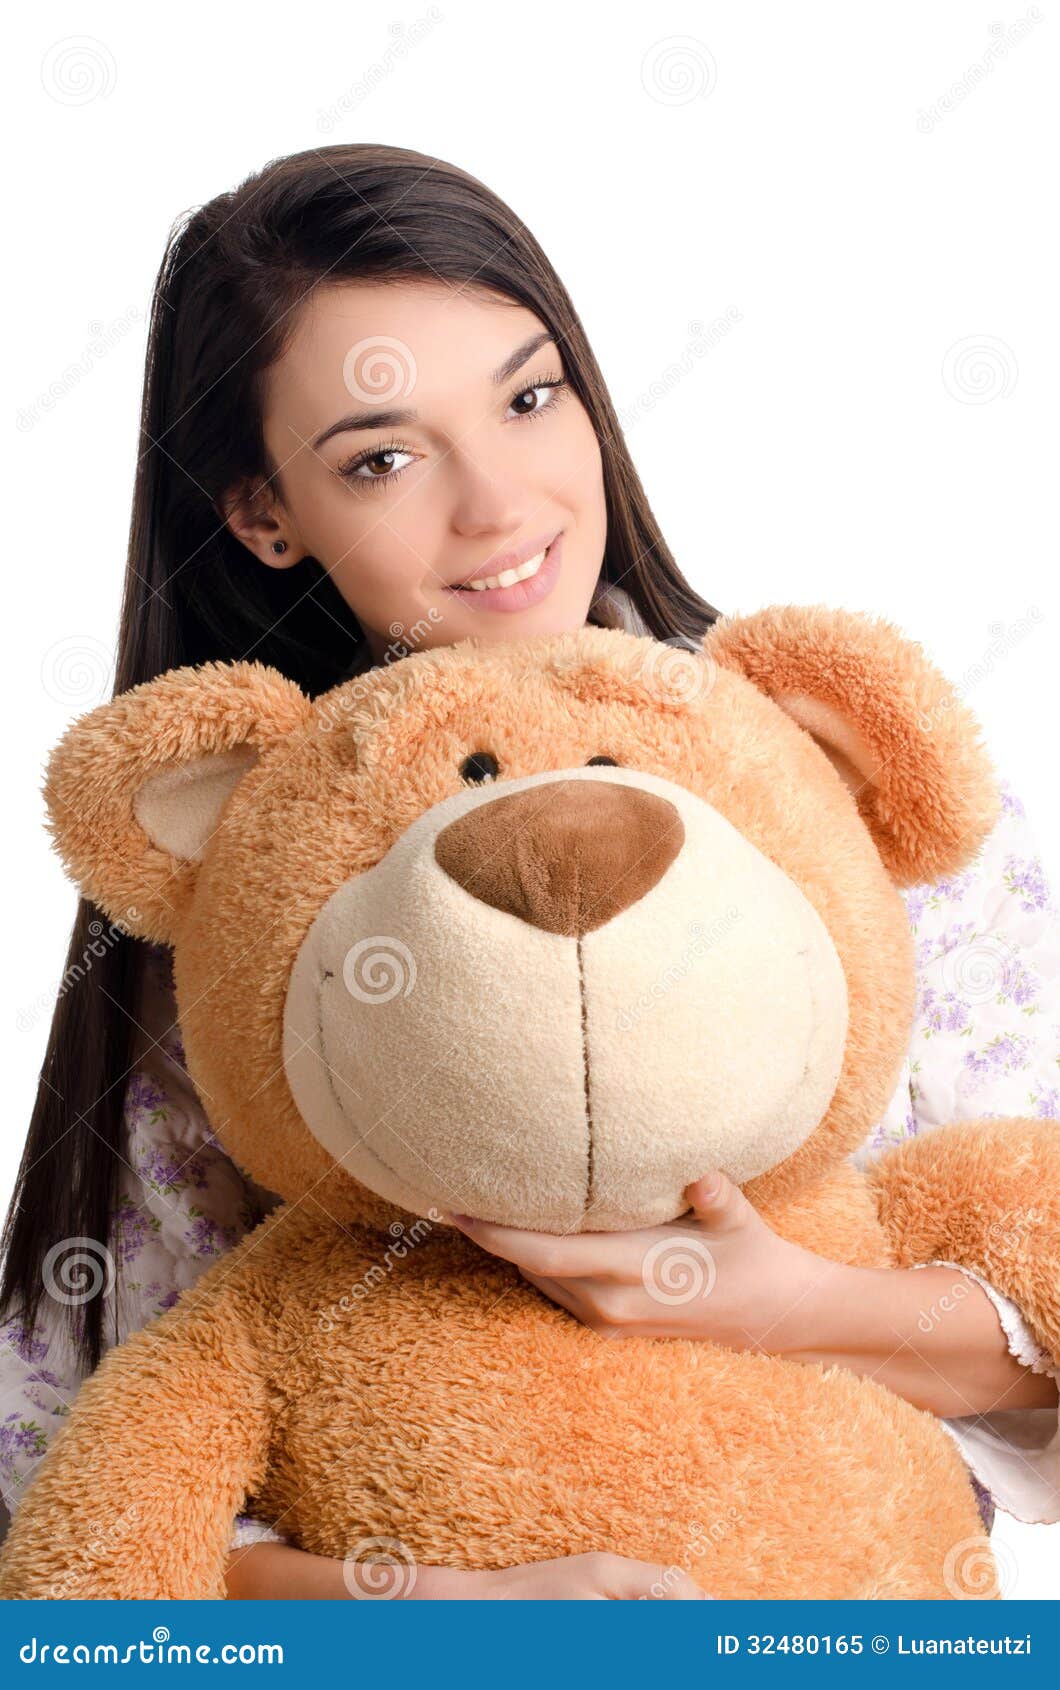 Beautiful Girl with a Big Teddy Bear. Stock Image - Image of ...